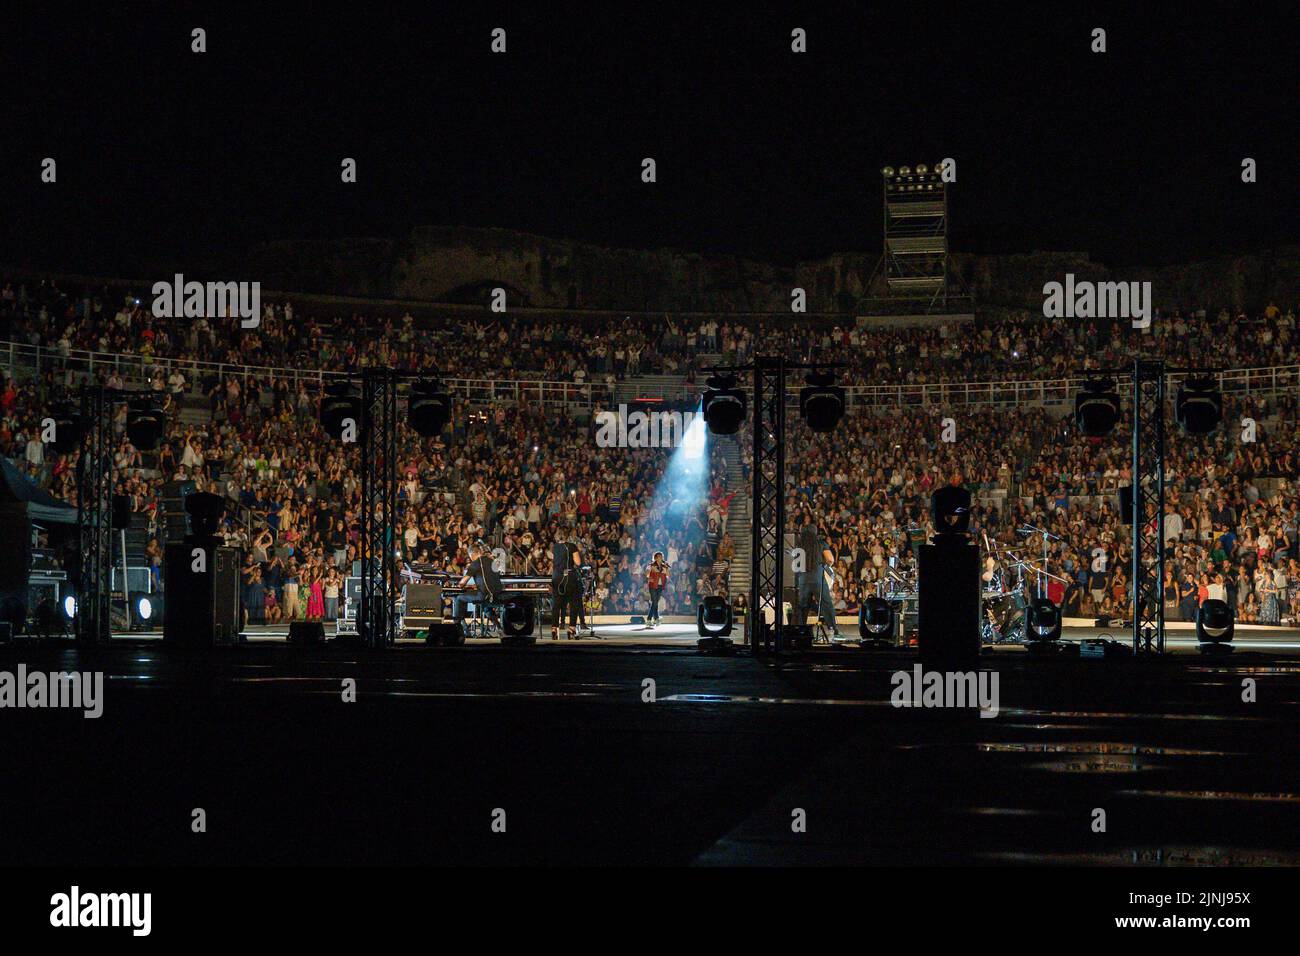 Siracusa, Italy. 11th Aug, 2022. Gianna Nannini performing on theatre during Gianna Nannini - Estate 2022, Italian singer Music Concert in Siracusa, Italy, August 11 2022 Credit: Independent Photo Agency/Alamy Live News Stock Photo